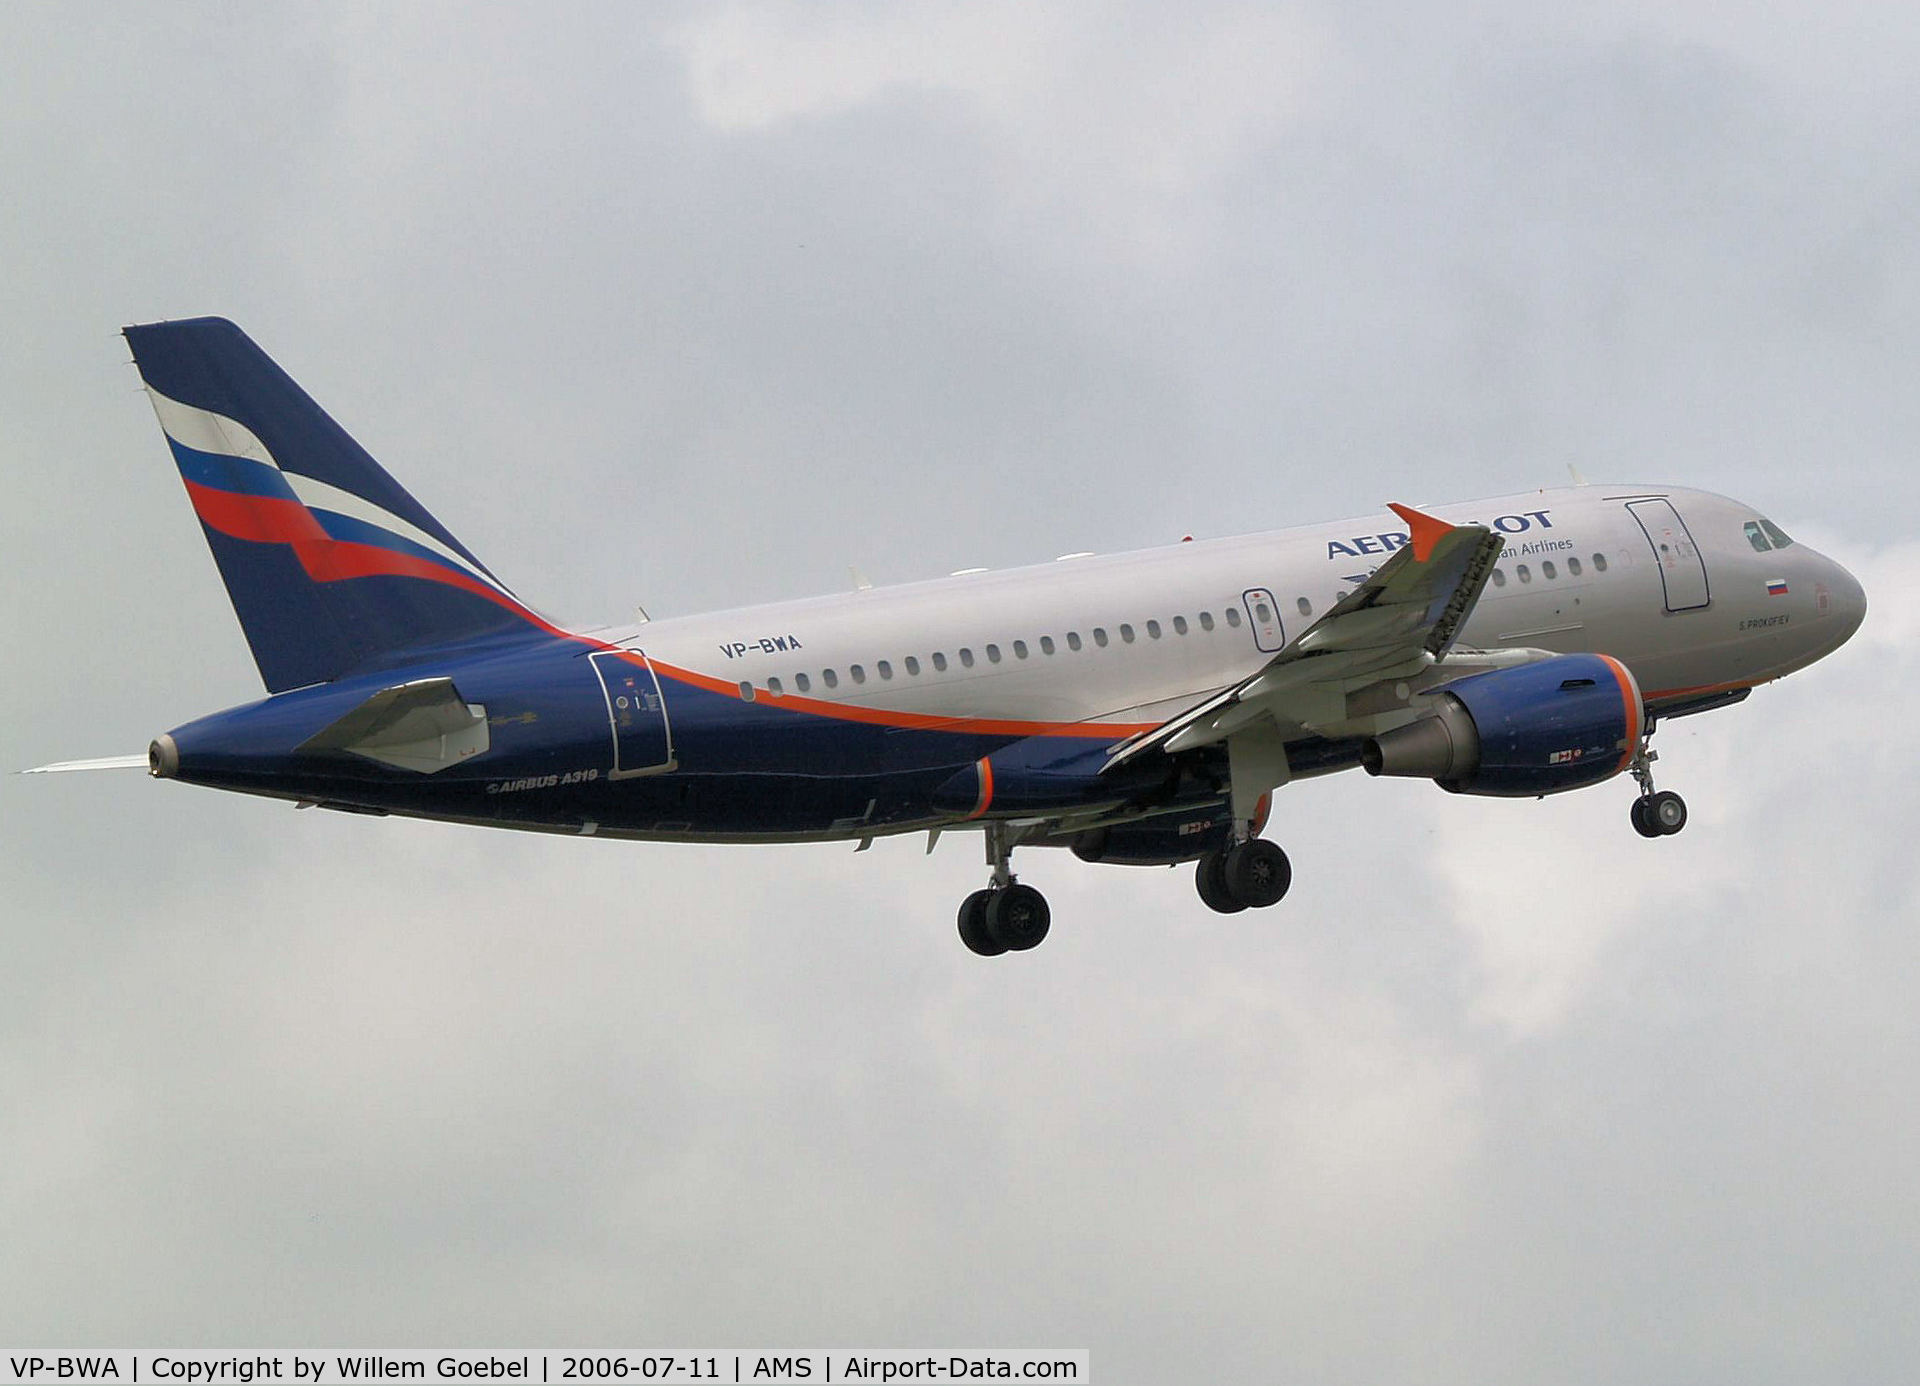 VP-BWA, 2003 Airbus A319-111 C/N 2052, Take off from runway 06 of Amsterdam Airport